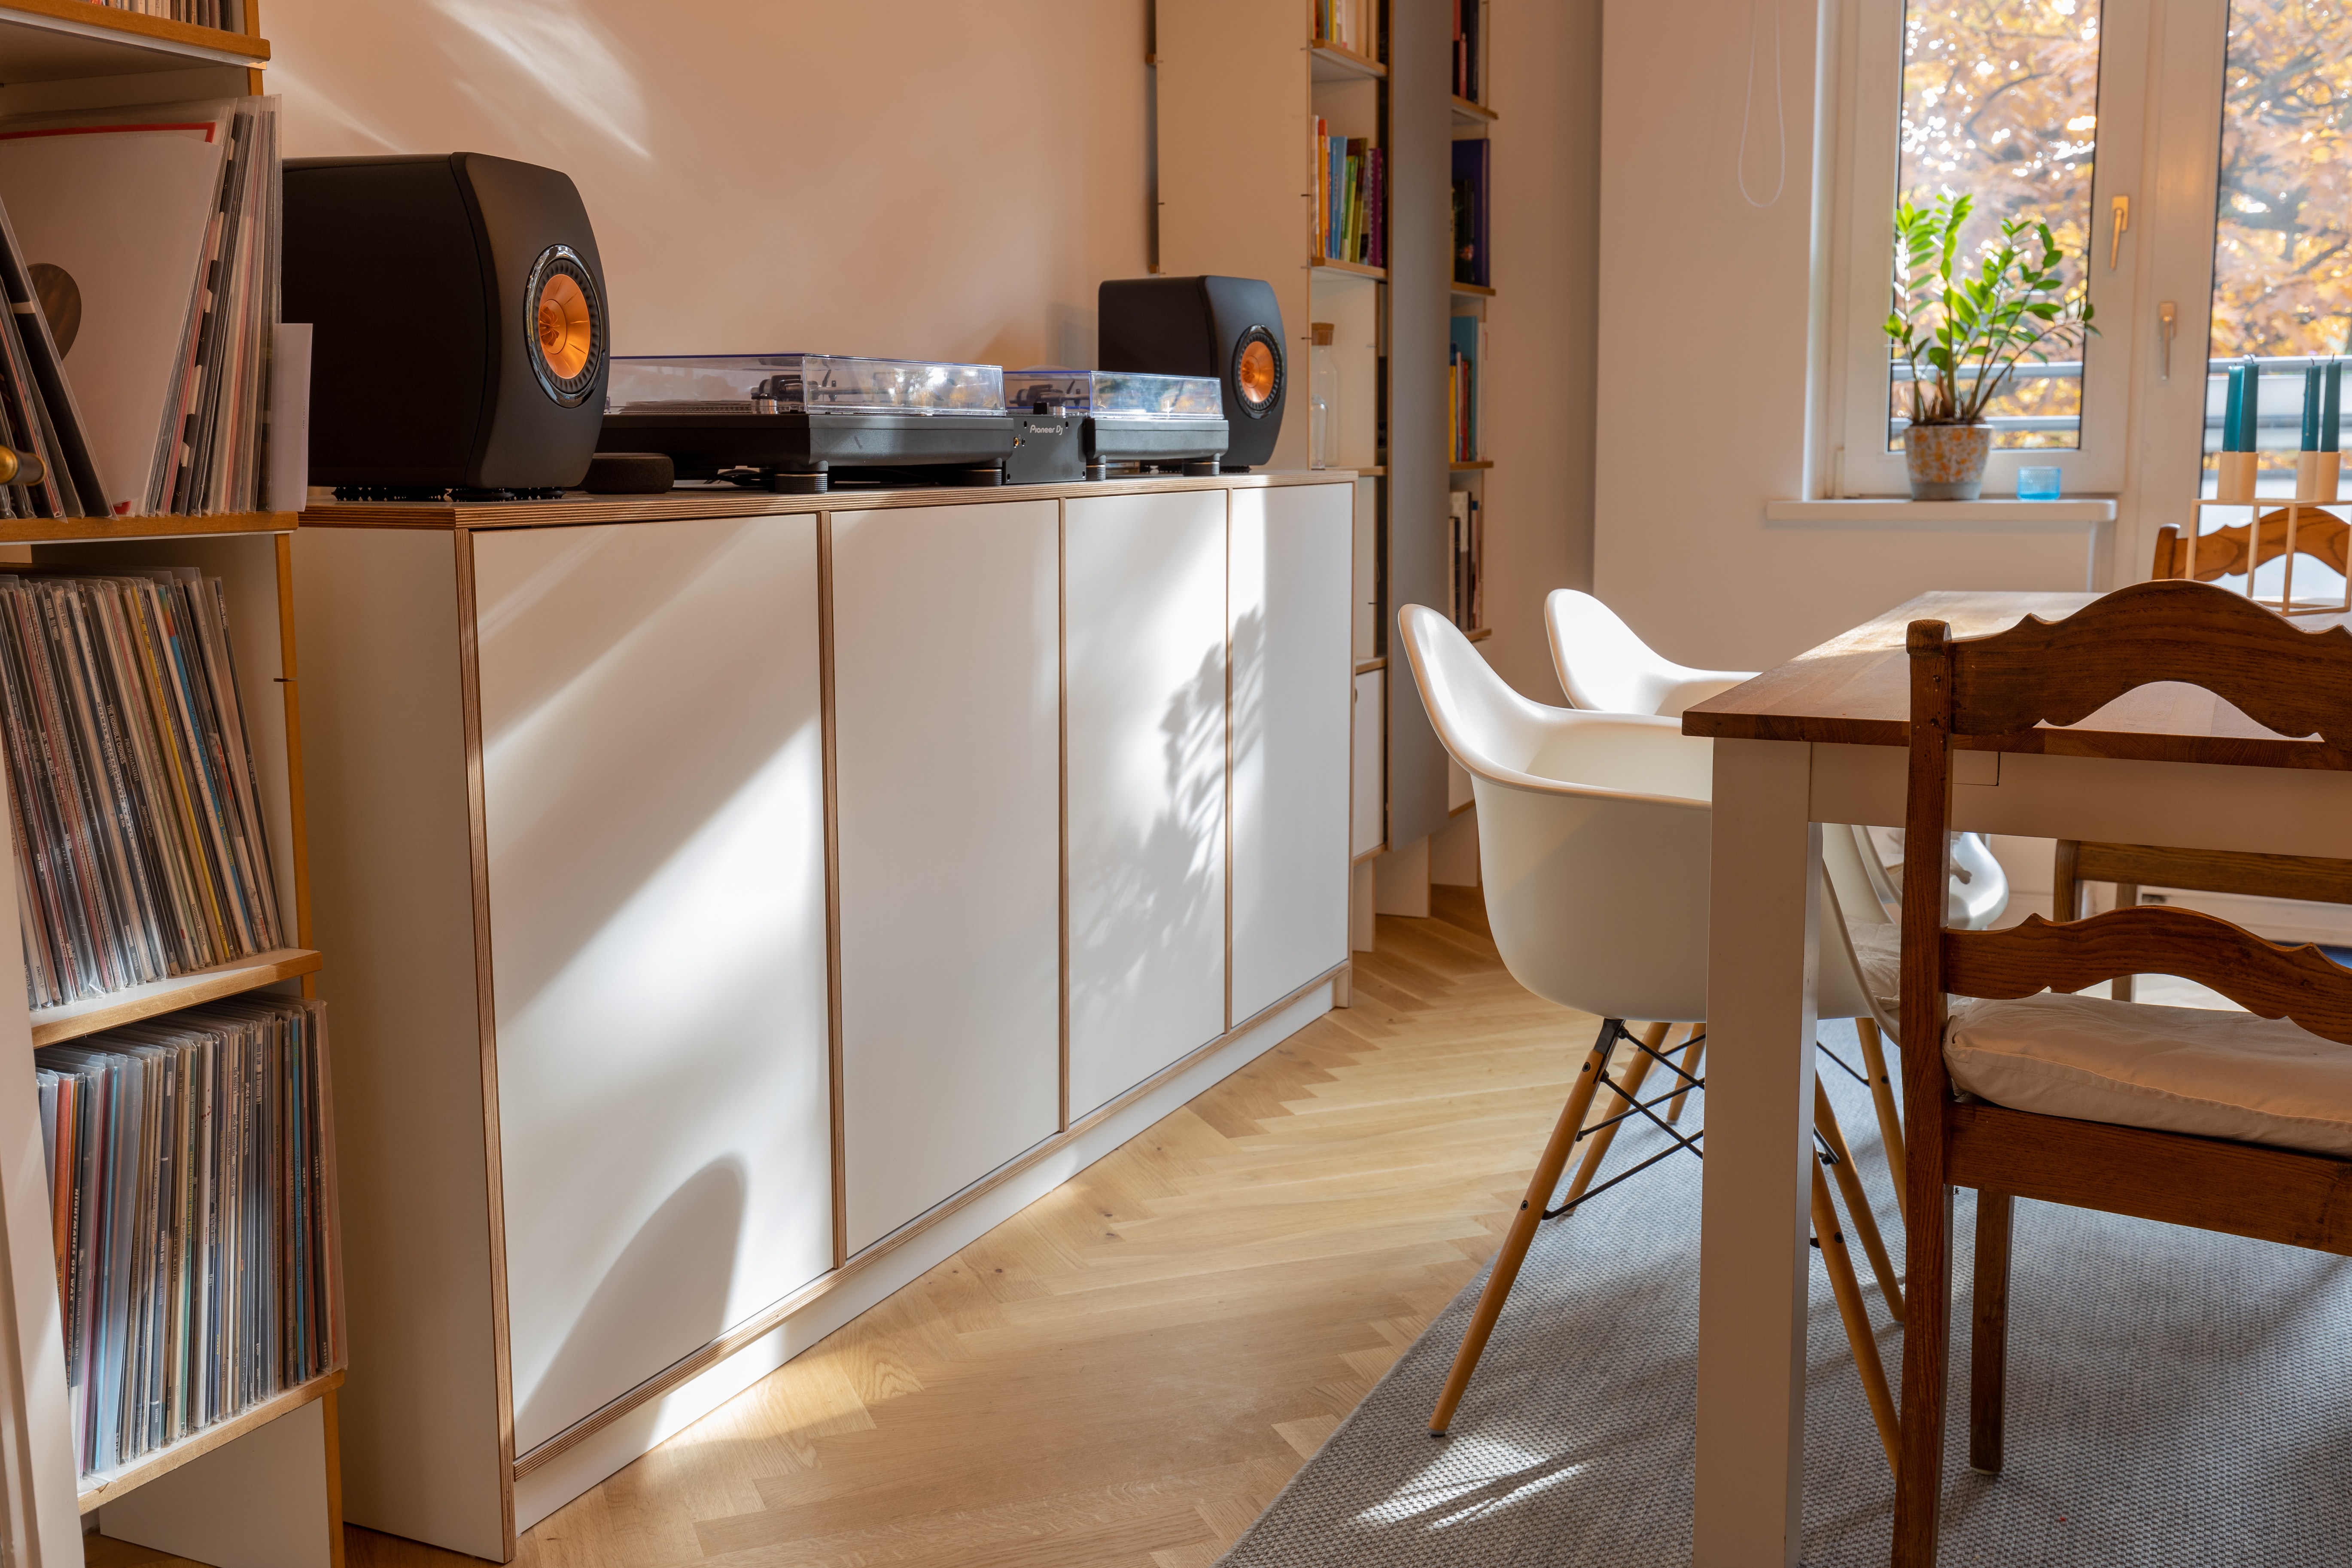 Luxury vinyl flooring, whte and brown cabinets, sunshine coming through dining room, with small bookshelve, and speaker with stereo on counter. 